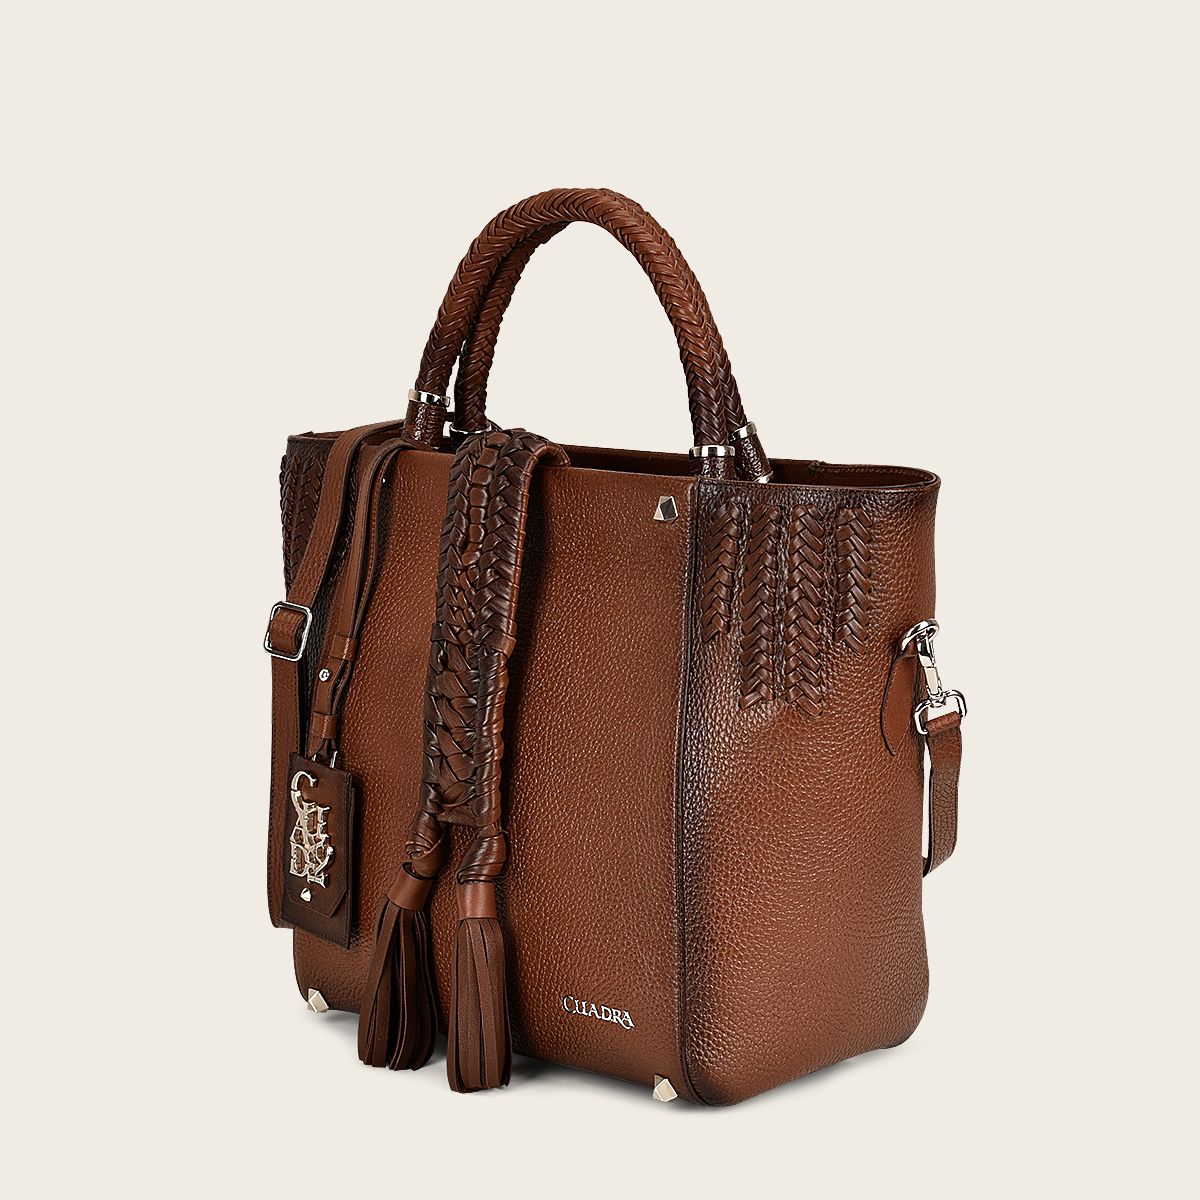 Brown leather tote bag with handmade fabric application